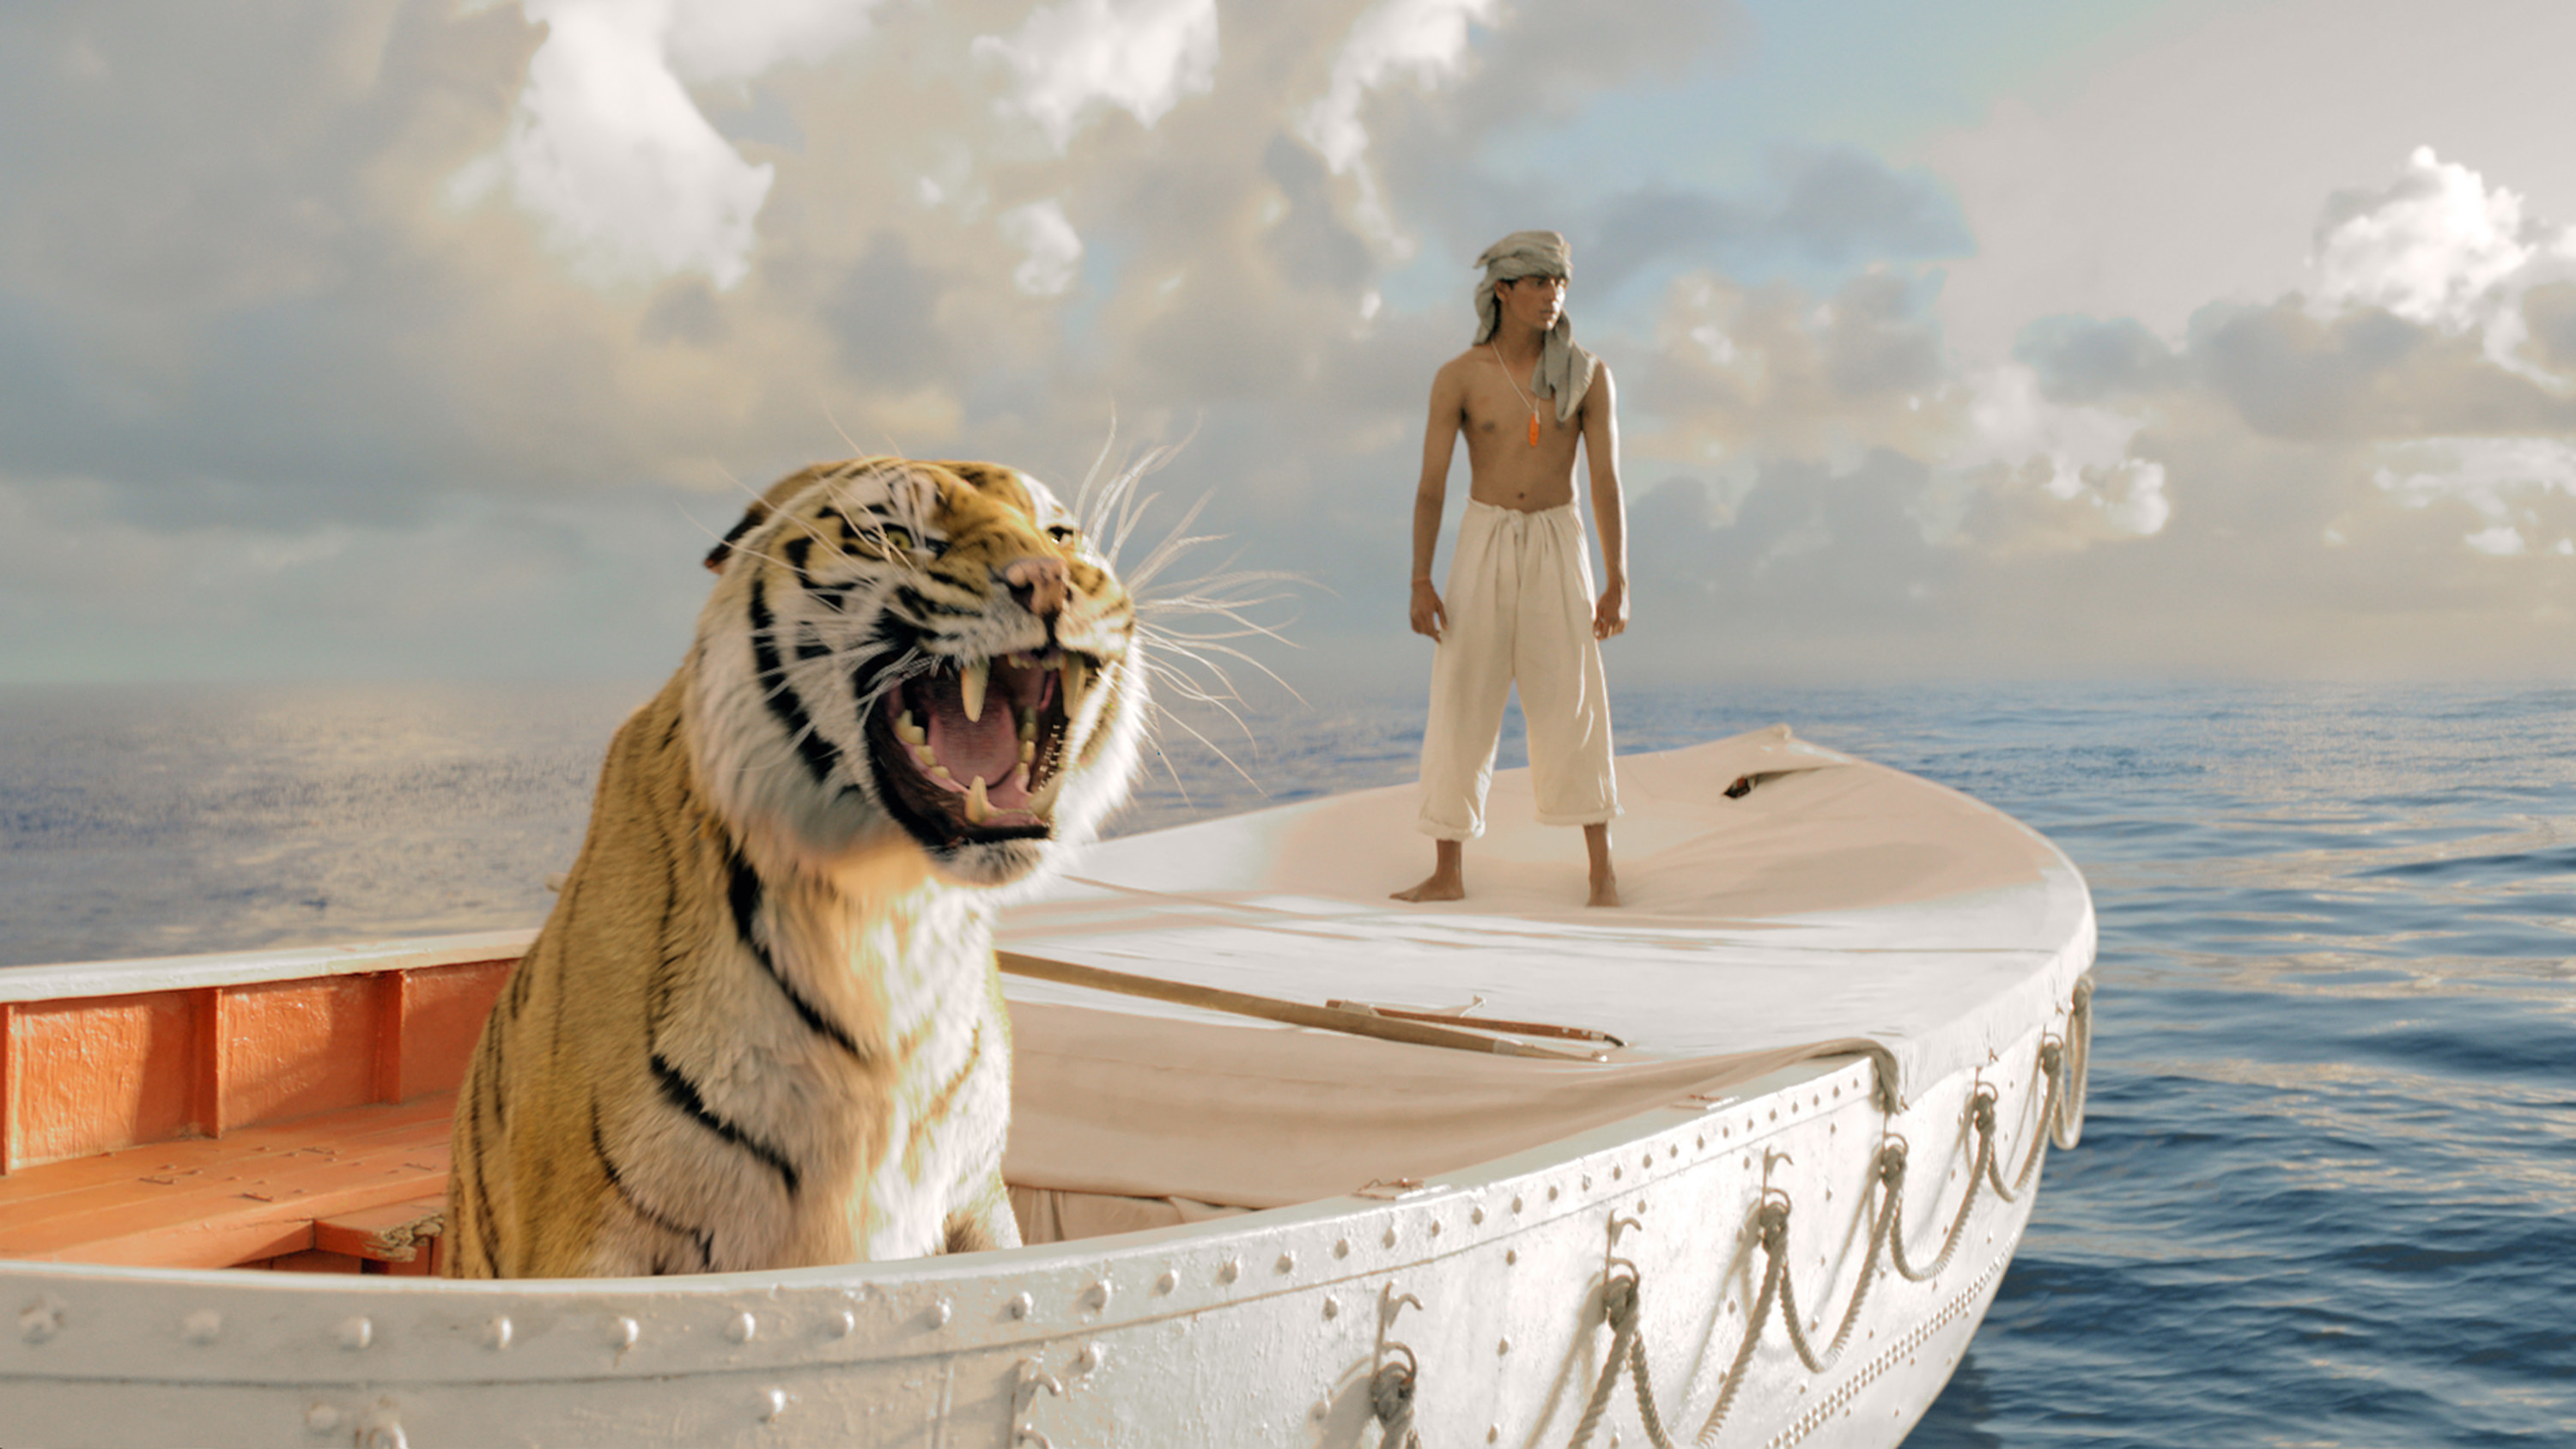 A young man stands on a boat with a lion